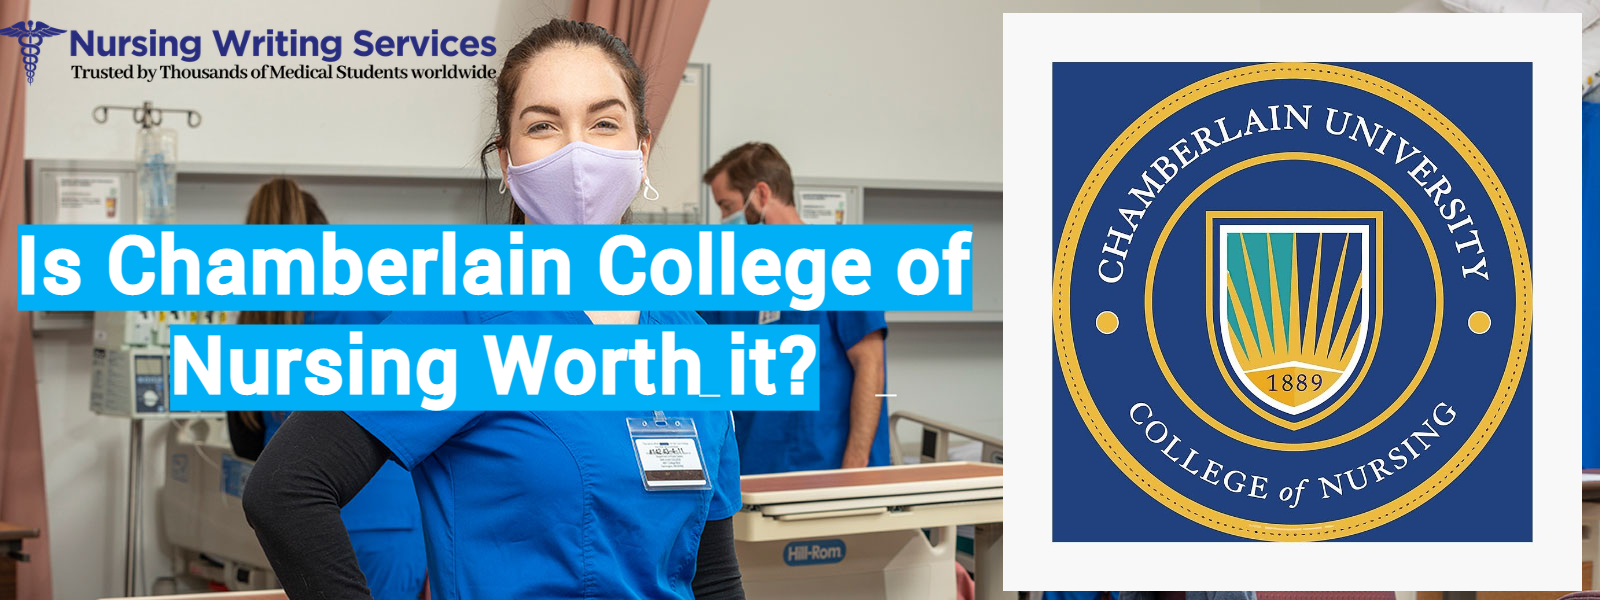 Nursing is a challenging and rewarding career that requires a lot of hard work and dedication. If you're looking to pursue a career in nursing, you may have come across Chamberlain College of Nursing. But is Chamberlain College of Nursing worth it? In this blog post, we'll explore the pros and cons of Chamberlain College of Nursing to help you make an informed decision. History and Reputation of Chamberlain College of Nursing Chamberlain College of Nursing is a for-profit college that was founded in 1889. The college has a long history of providing quality nursing education to students. However, being a for-profit college, Chamberlain College of Nursing has come under scrutiny for its high tuition fees and aggressive marketing tactics. Pros of Chamberlain College of Nursing Flexible Learning Options: Chamberlain College of Nursing offers both on-campus and online learning options. This allows students to choose the learning format that works best for them. Accelerated Programs: Chamberlain College of Nursing offers accelerated programs that allow students to complete their nursing degree in less time than traditional programs. Support Services: The college offers a range of support services, including academic advising, tutoring, and career services, to help students succeed in their nursing program. Cons of Chamberlain College of Nursing High Tuition Fees: Chamberlain College of Nursing is a for-profit college, and as such, its tuition fees are significantly higher than those of public colleges. Limited Campus Locations: Chamberlain College of Nursing has a limited number of campus locations, which may make it difficult for some students to attend. Financial Aid: The college has been criticized for its aggressive marketing tactics that encourage students to take out student loans without fully understanding the financial implications. Is Chamberlain College of Nursing Worth it? The answer to whether Chamberlain College of Nursing is worth it depends on your personal circumstances and goals. If you value flexibility and support services and are willing to pay higher tuition fees, then Chamberlain College of Nursing may be a good fit for you. However, if you are looking for a more affordable nursing program or prefer a traditional college experience, you may want to consider other options. In conclusion, Chamberlain College of Nursing is a well-established nursing school that offers flexible learning options and a range of support services. However, its high tuition fees and limited campus locations may not be suitable for everyone. It's essential to weigh the pros and cons carefully before deciding whether to enroll in Chamberlain College of Nursing.